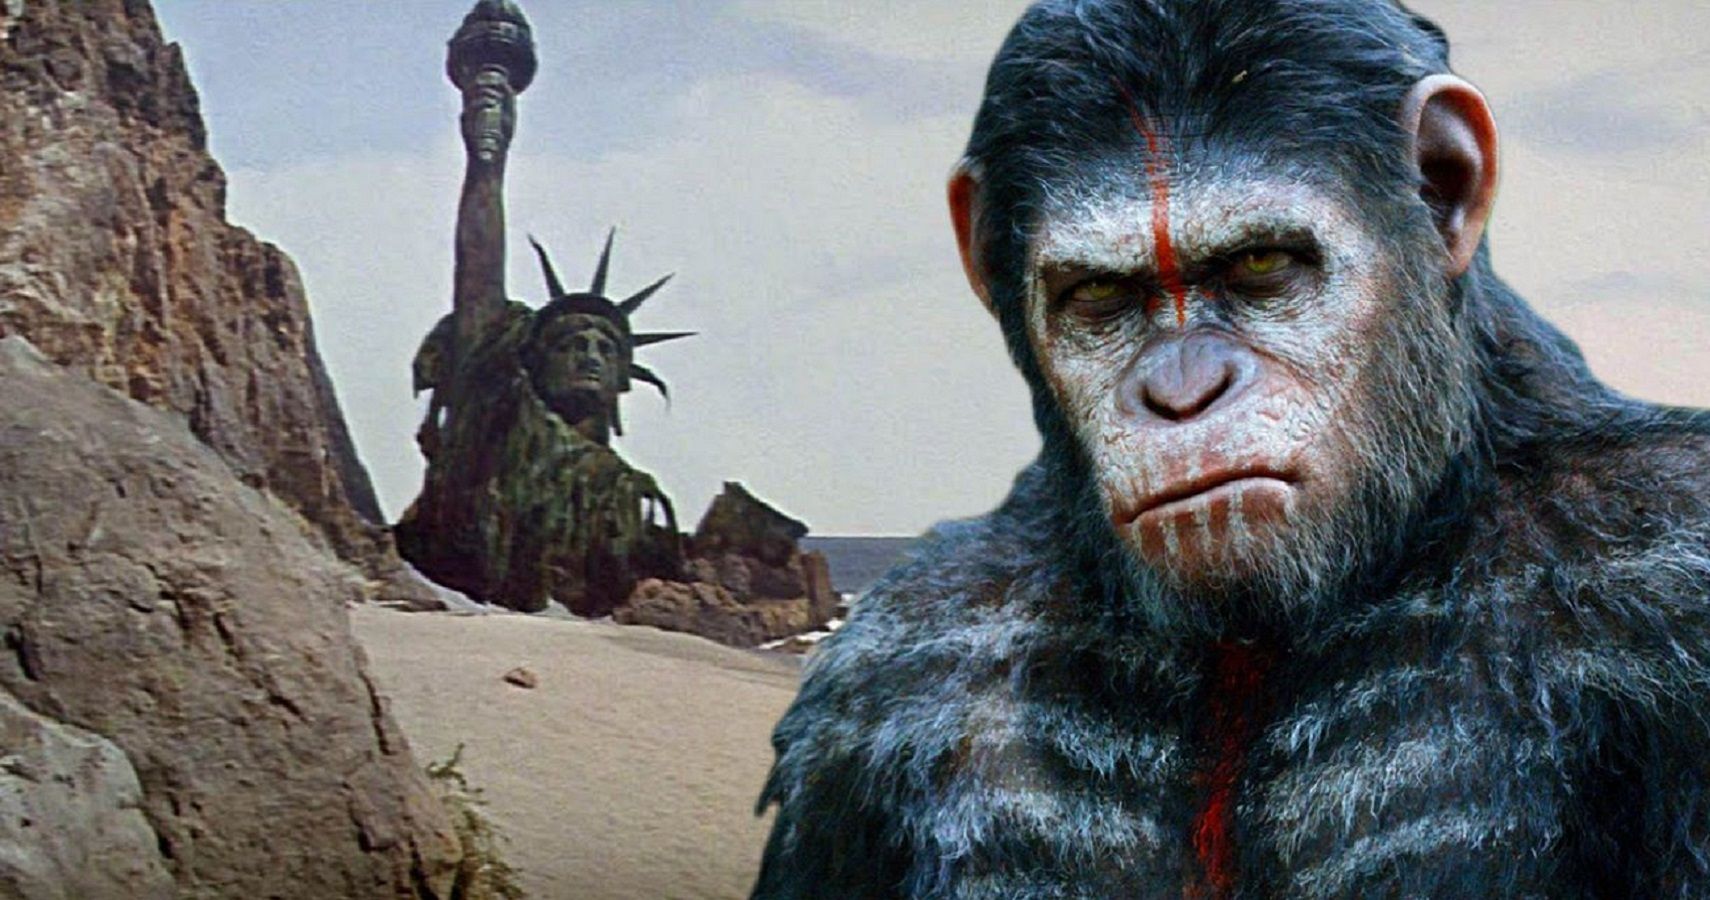 Of The Apes Names, of the Apes (1968) 50th Anniversary